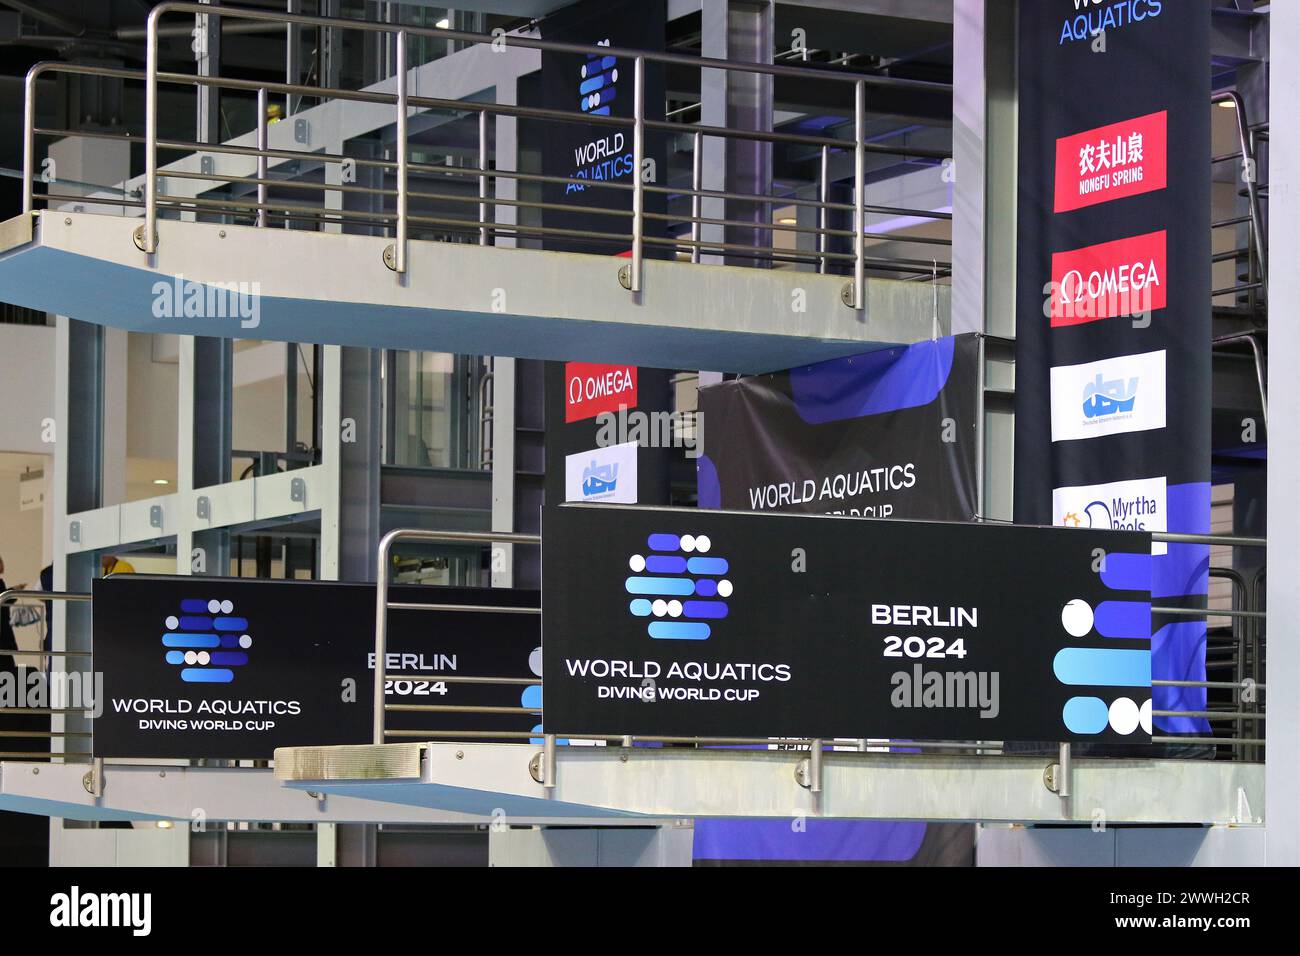 Berlin, Germany - March 22, 2024: Event logos on the decoration board seen in Schwimm- & Sprunghalle im Europasportpark (SSE) arena during the World Aquatics Diving World Cup 2024 in Berlin, Germany Stock Photo